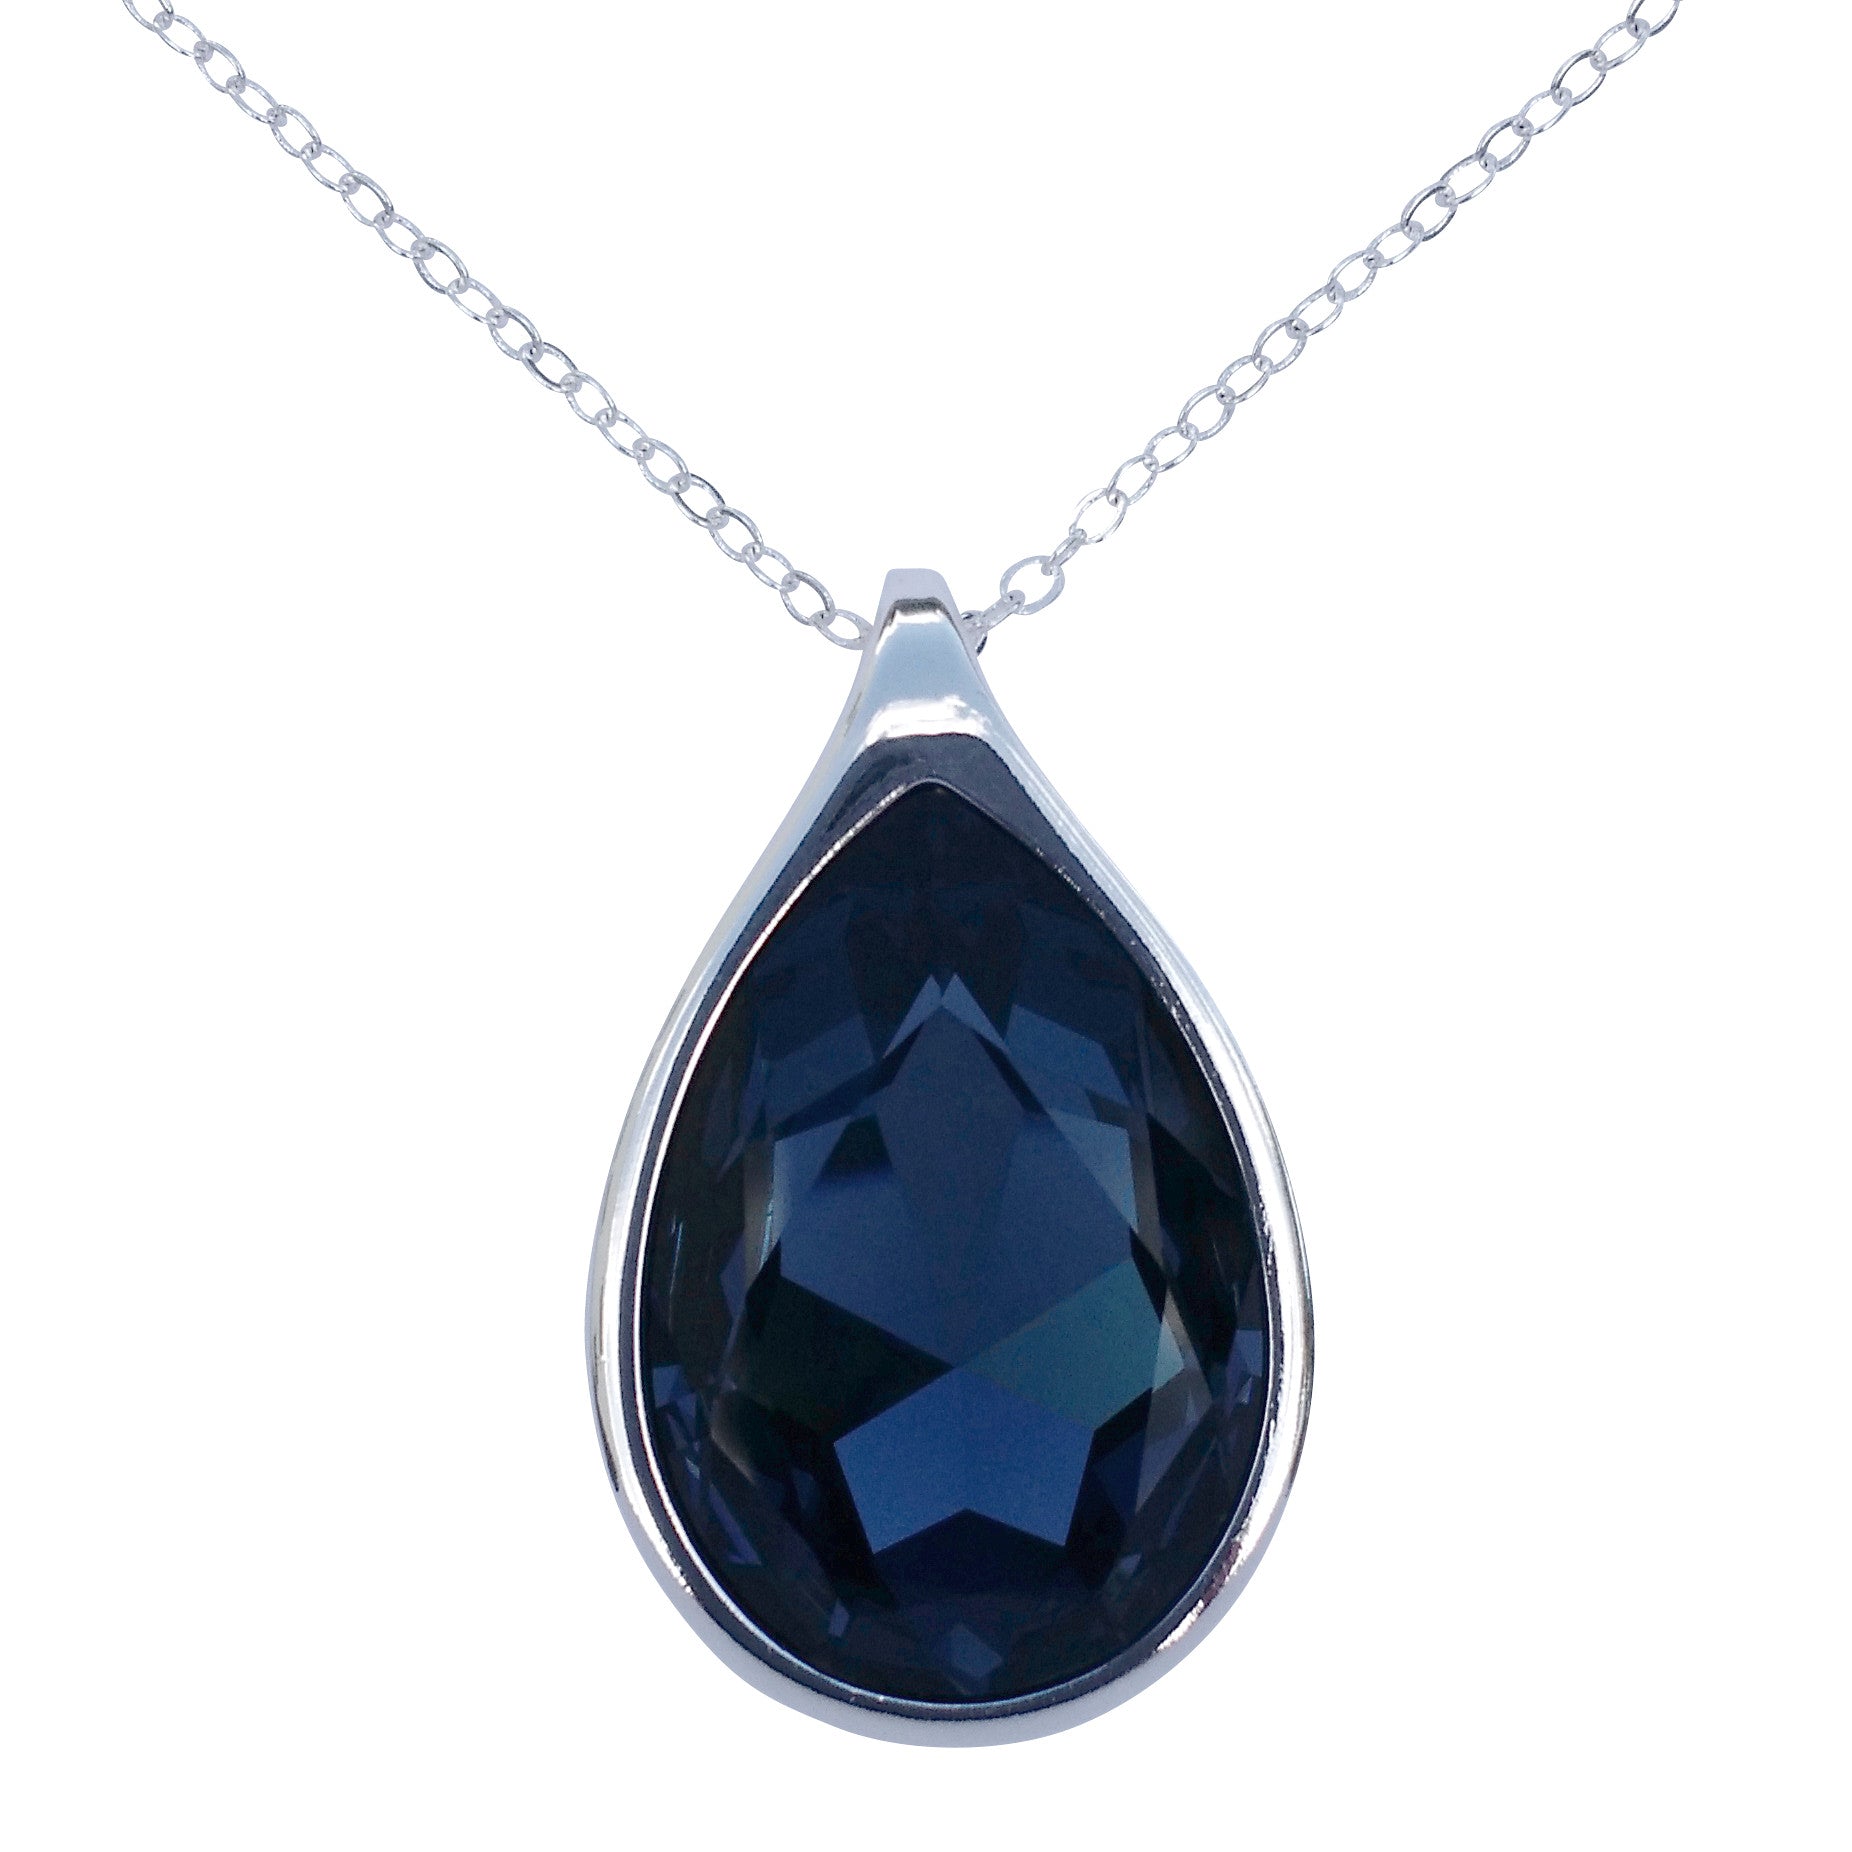 Share more than 160 blue sapphire teardrop necklace super hot ...